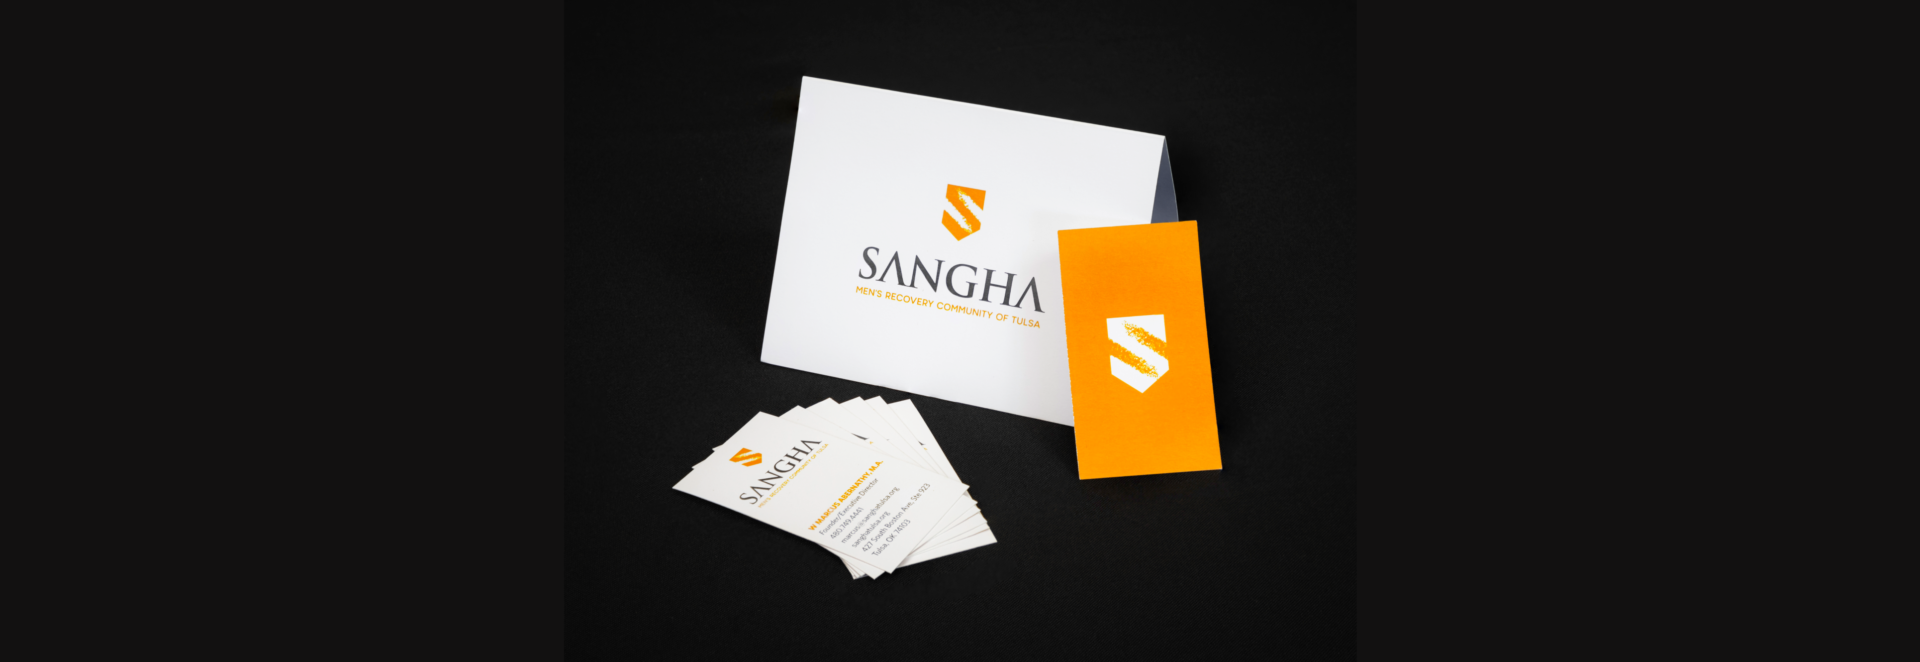 Branded stationary for Sangha Men's Recovery Community designed by AcrobatAnt.